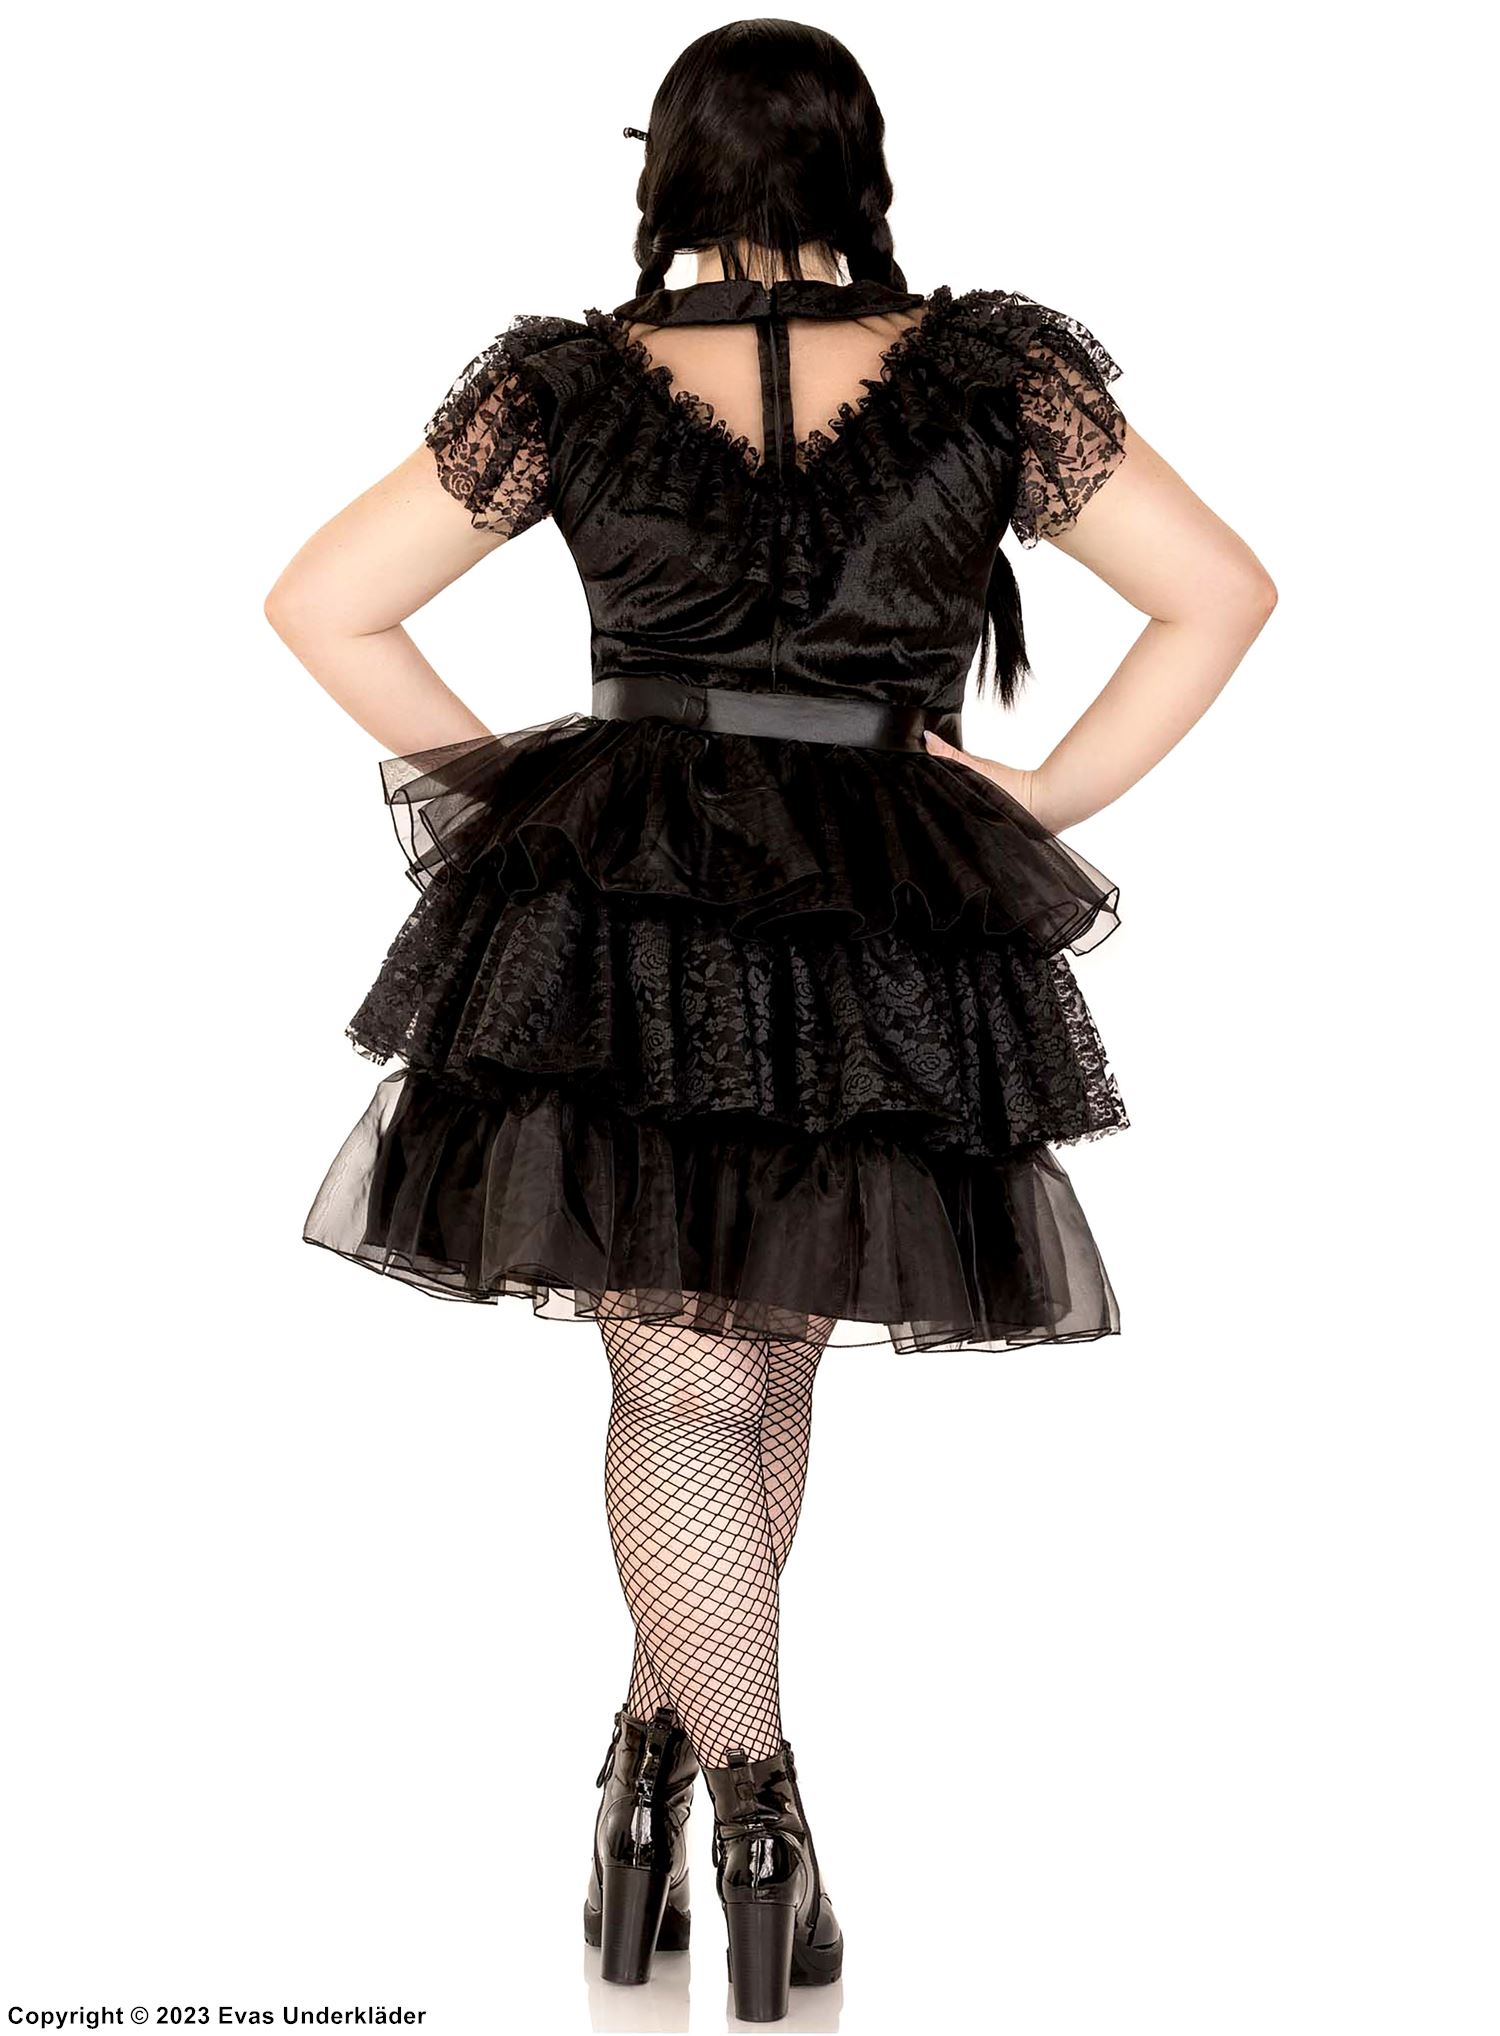 Wednesday from The Addams Family, costume dress, ruffles, roses, plus size